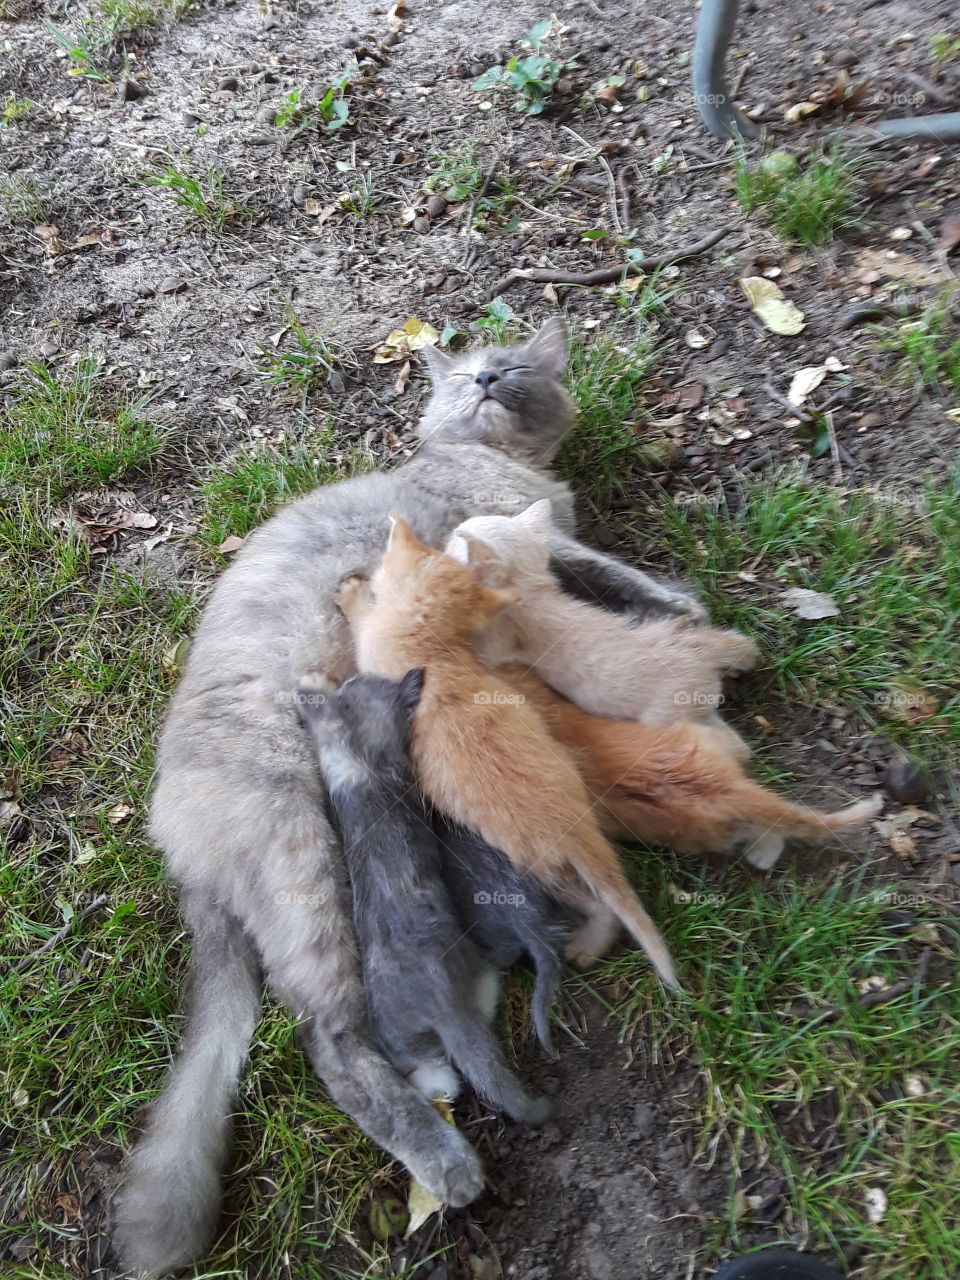 My baby, Mama, and her beautiful little kittens.